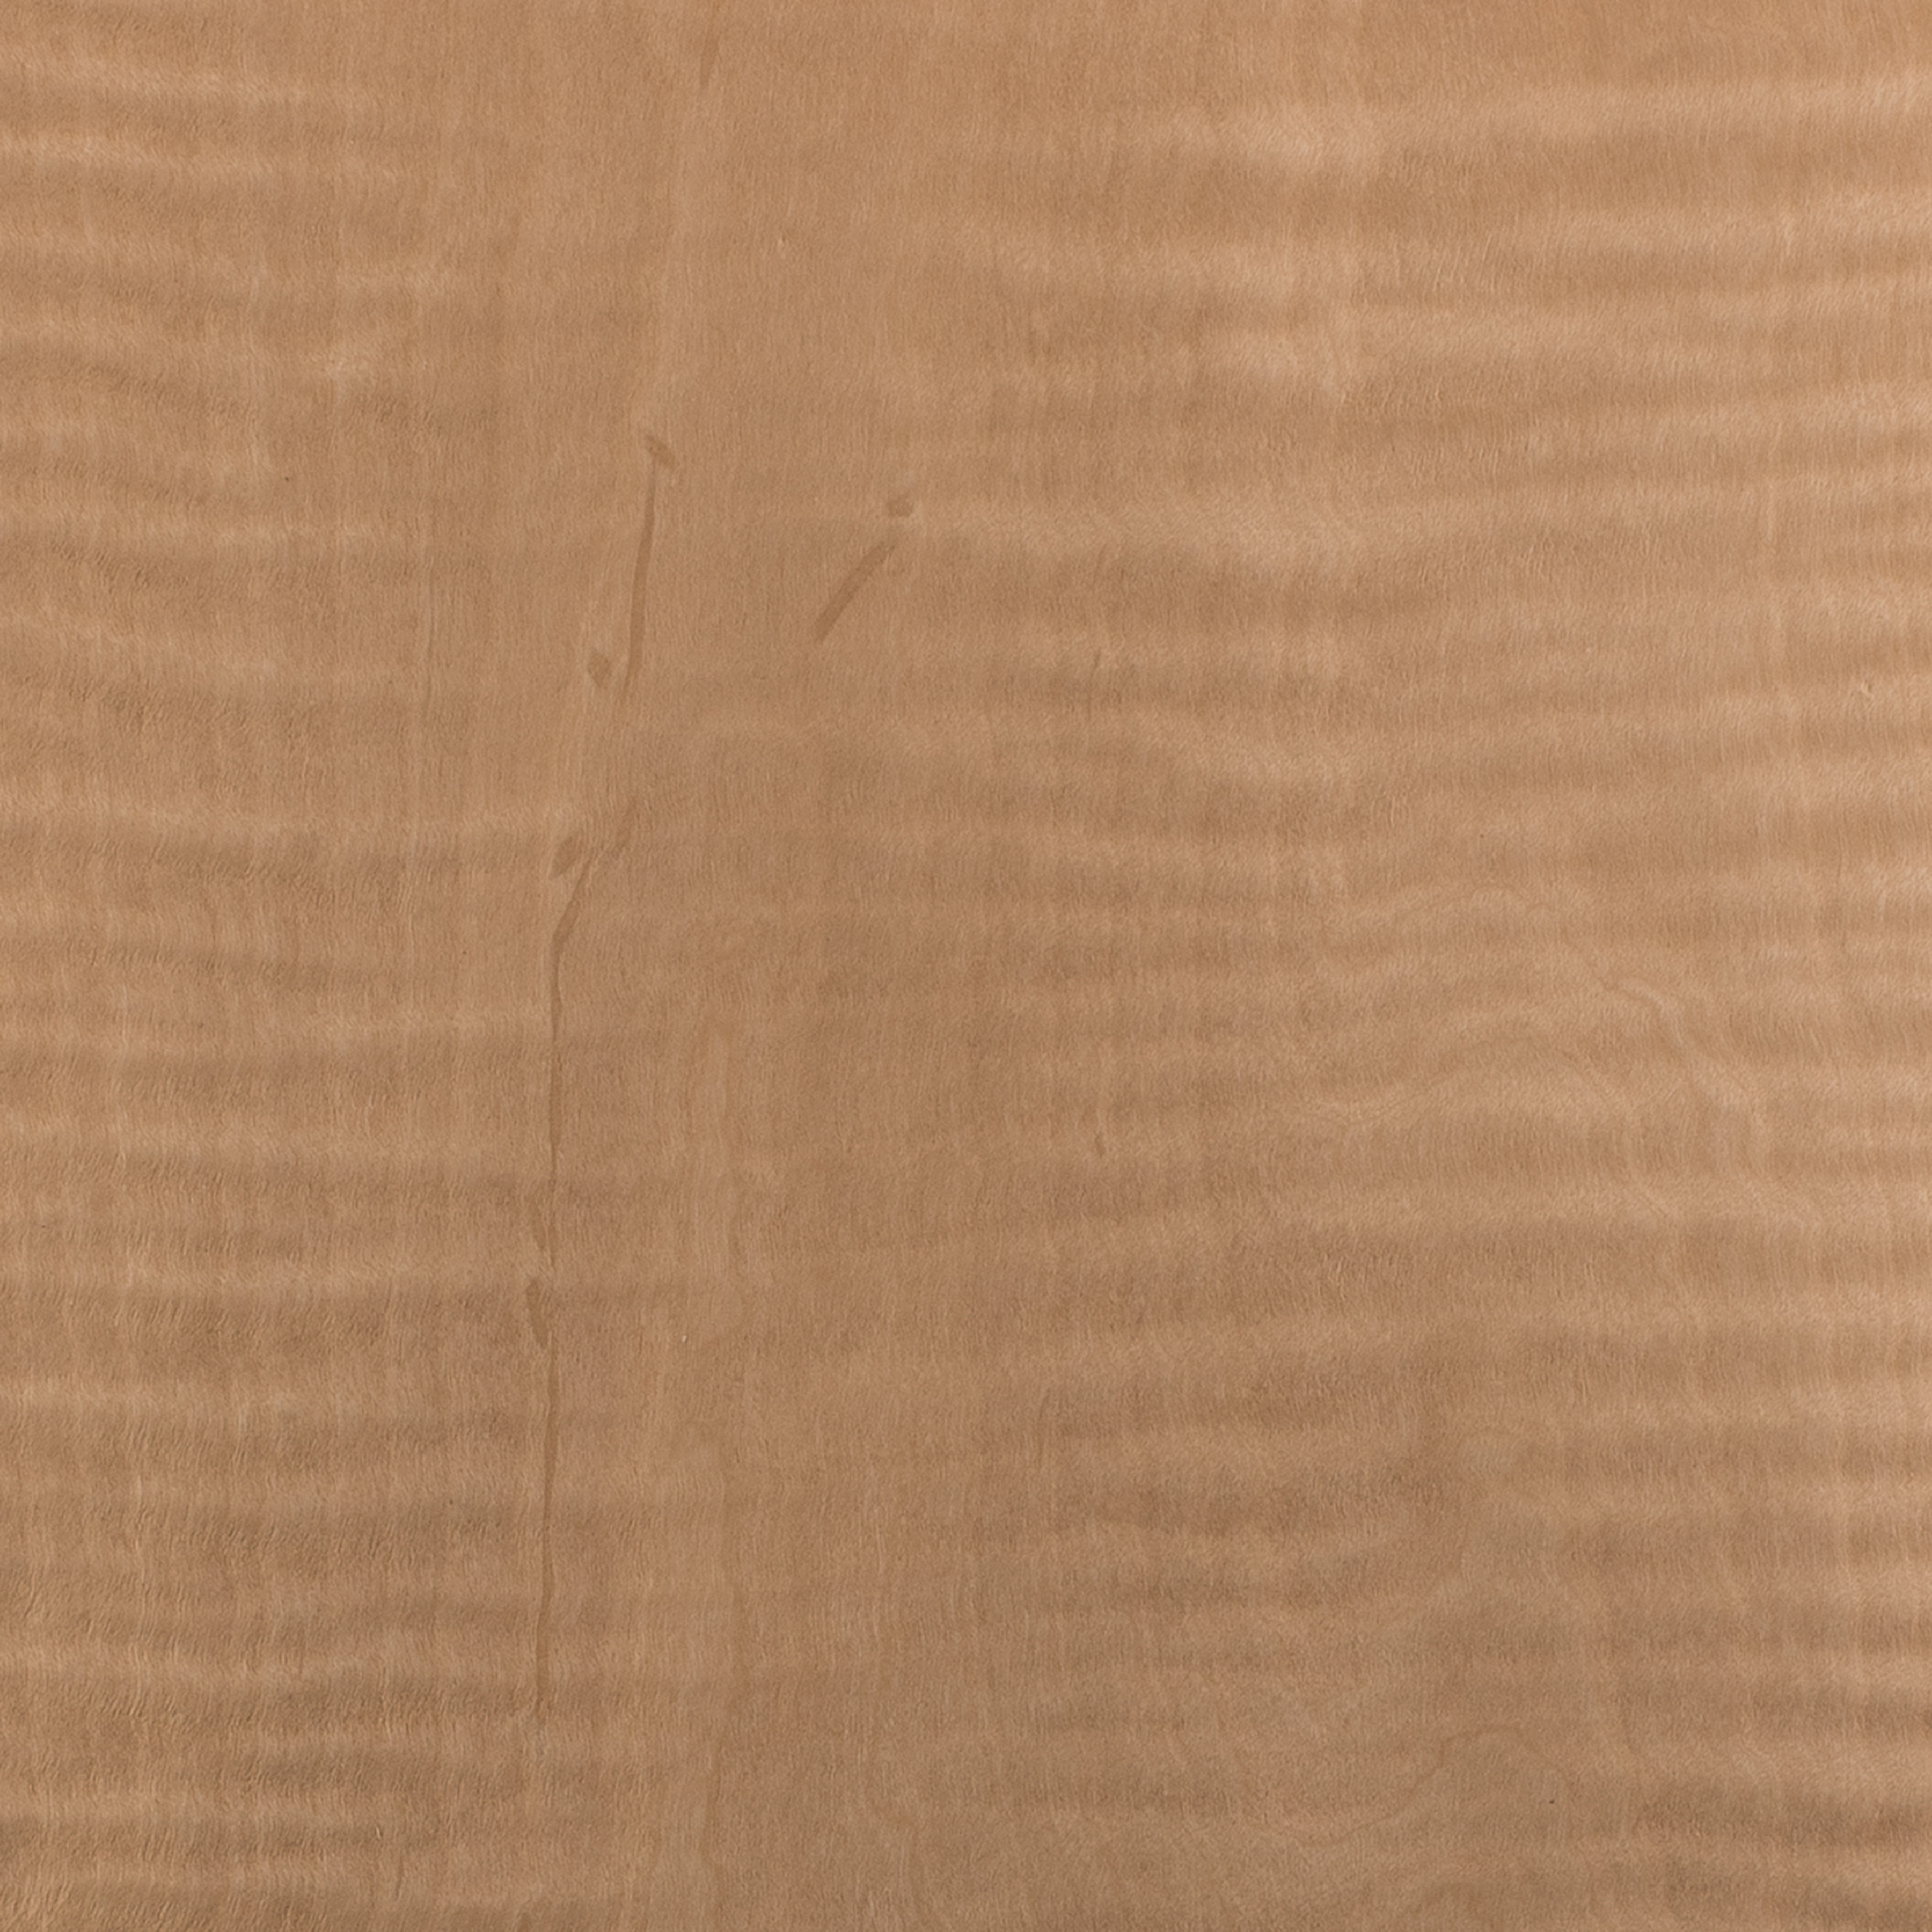 NATURAL WOOD Sheet 31.5 x 5.7 inches 800mm x 145mm Figured Sycamore Veneer 